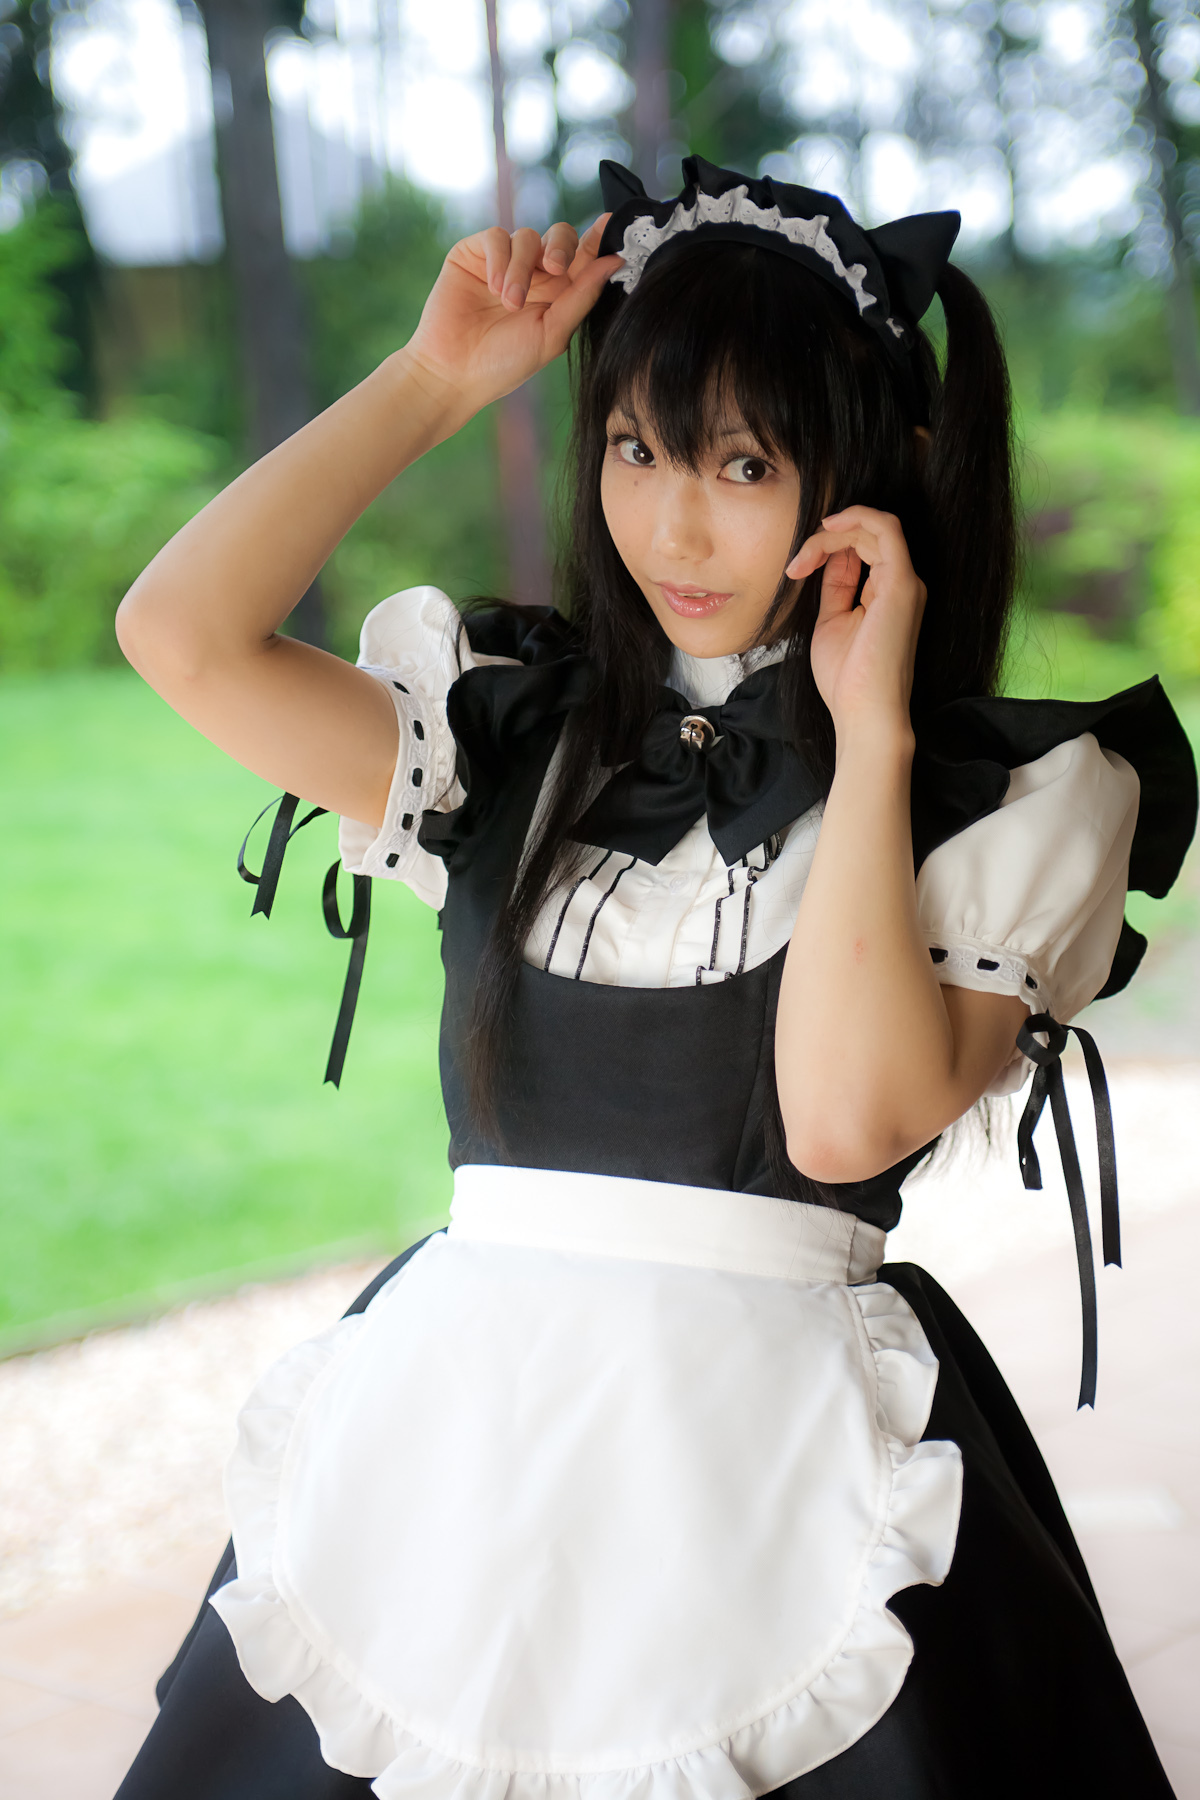 Cosplay exquisite high definition set lenfredom! Type D (2)